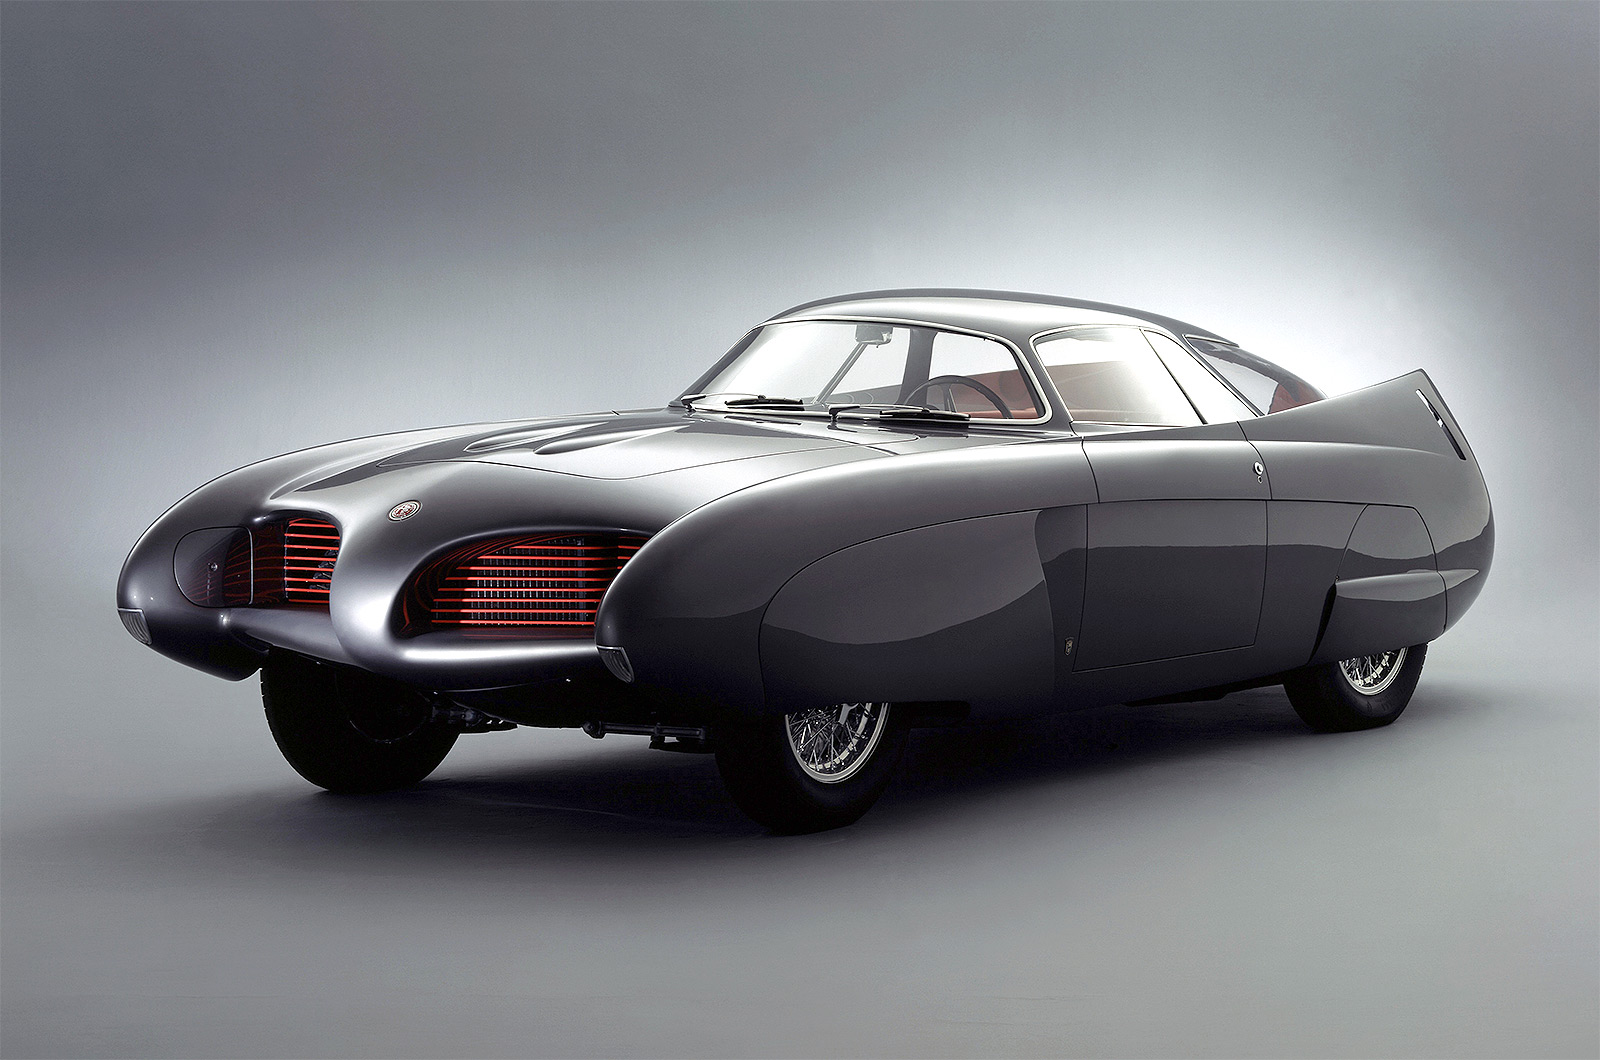 The most important concept cars ever created